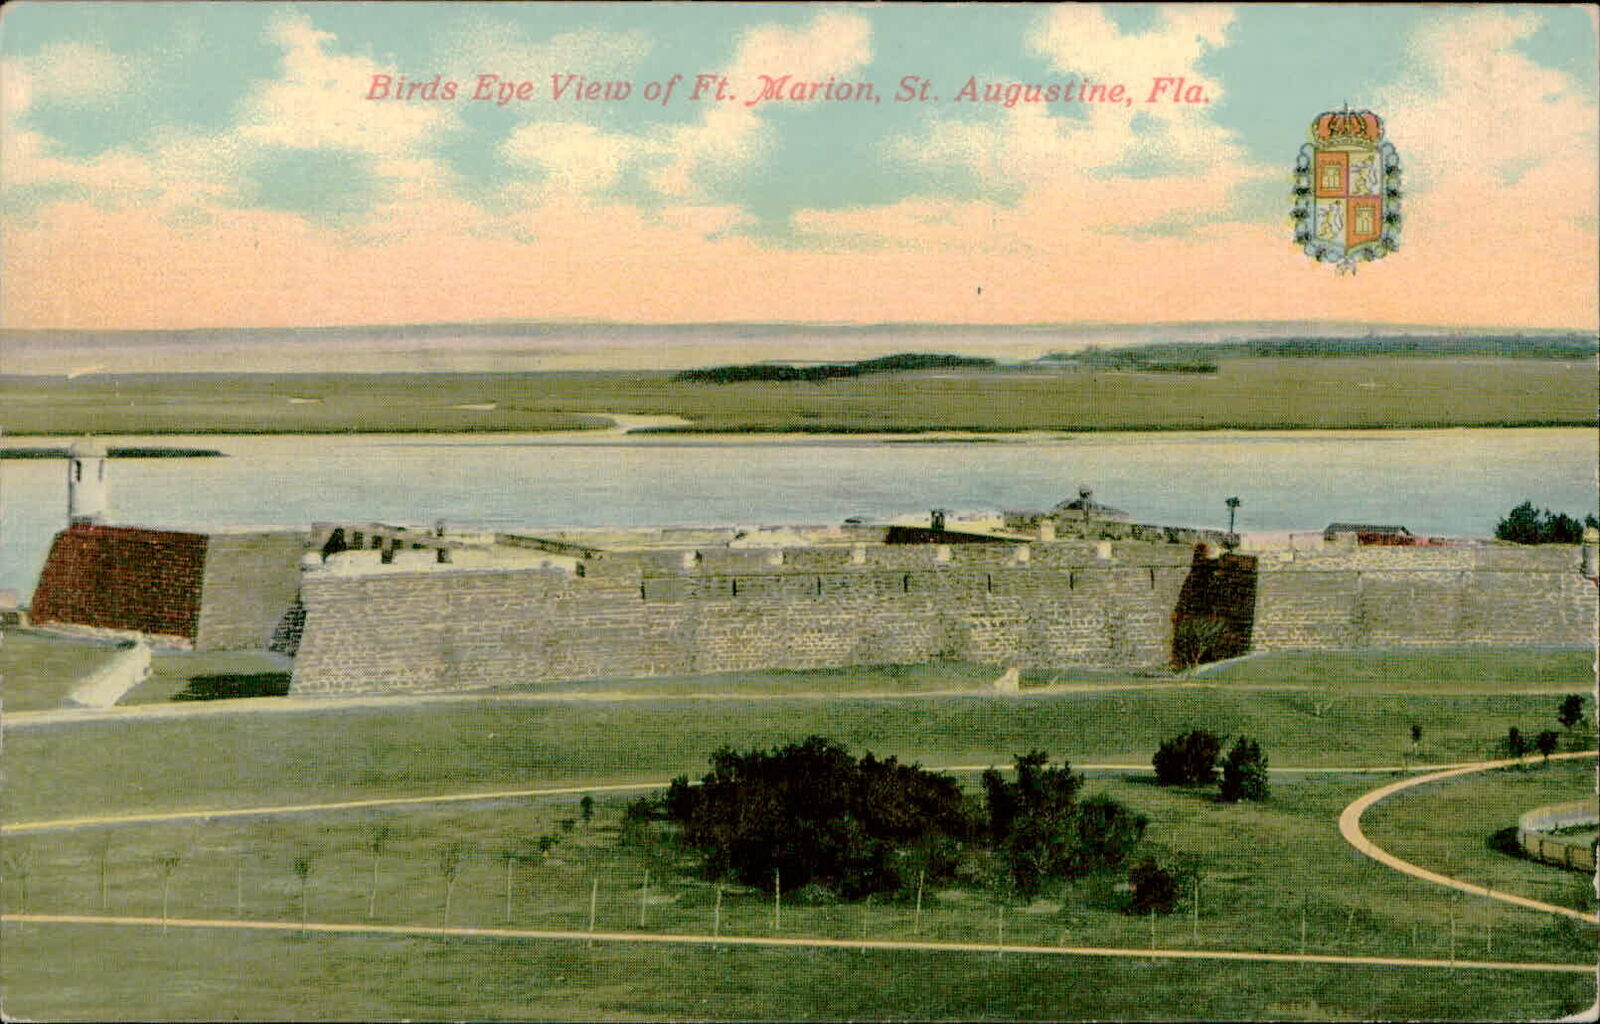 Postcard: Birds Eye View of Ft. Marion, St. Augustine, Fla.